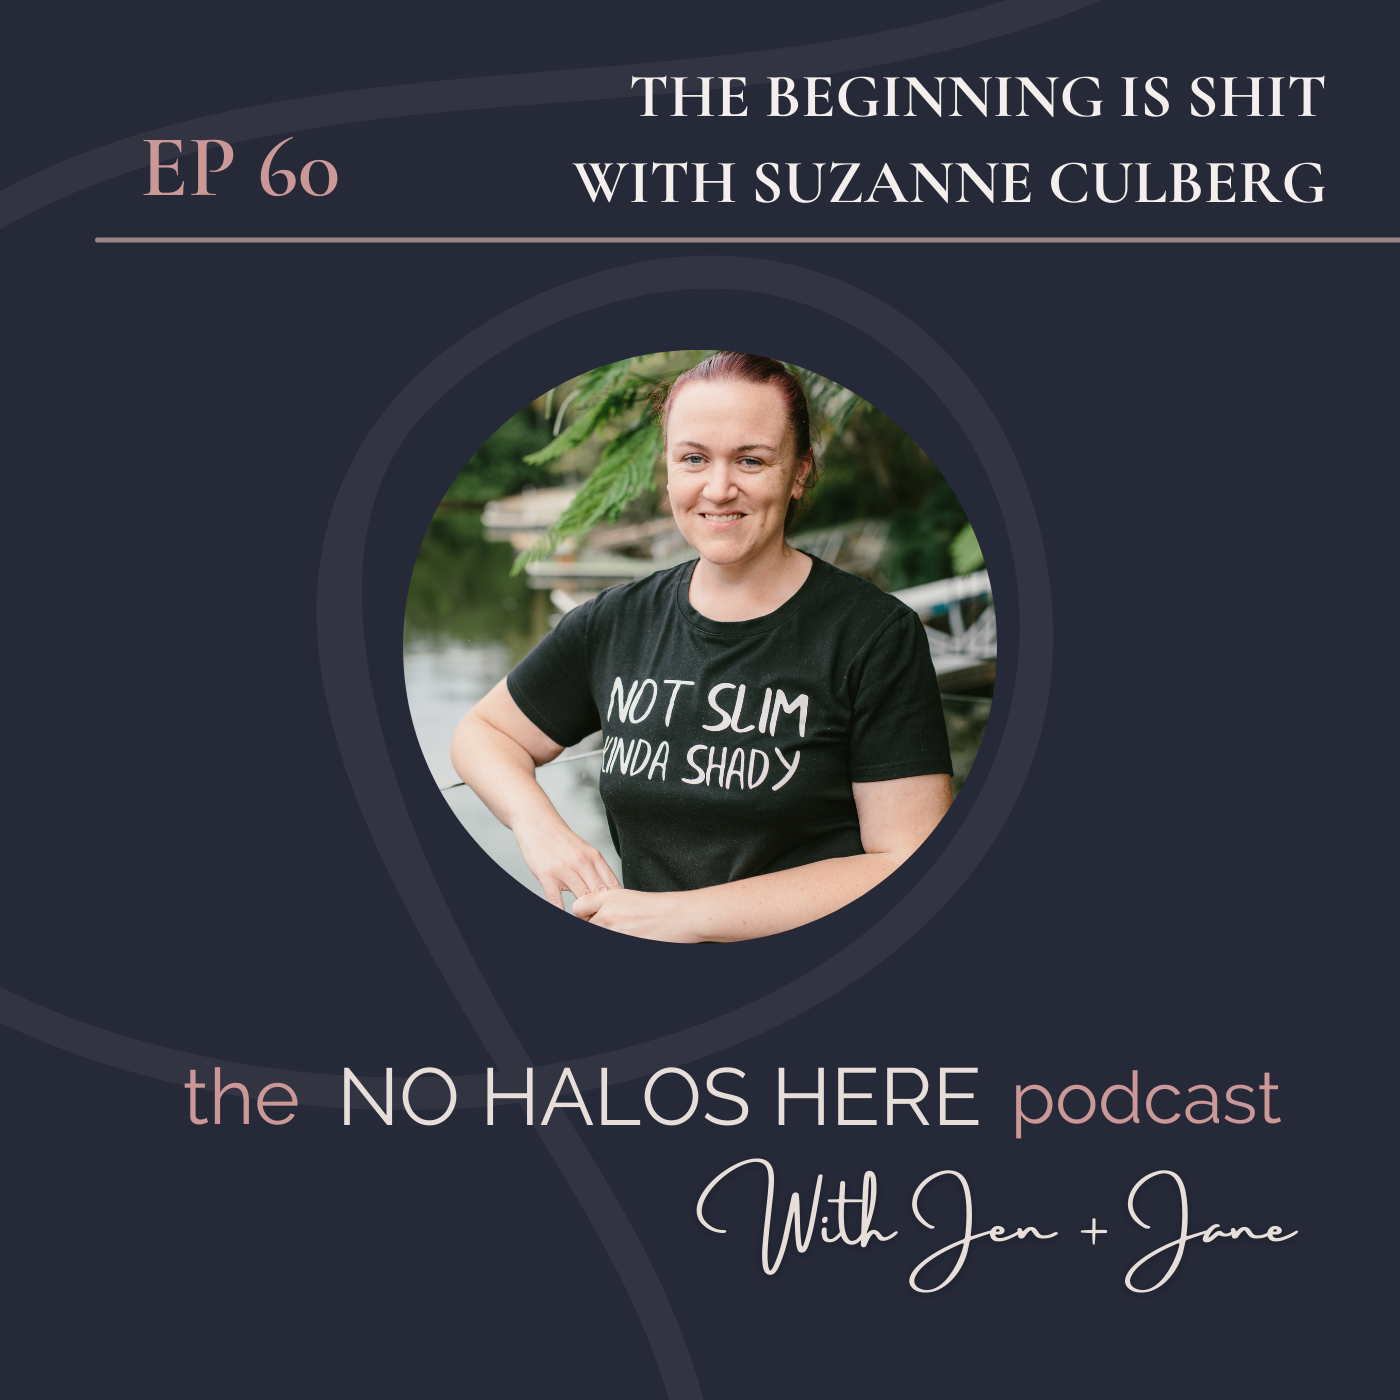 The Beginning is Shit with Suzanne Culberg